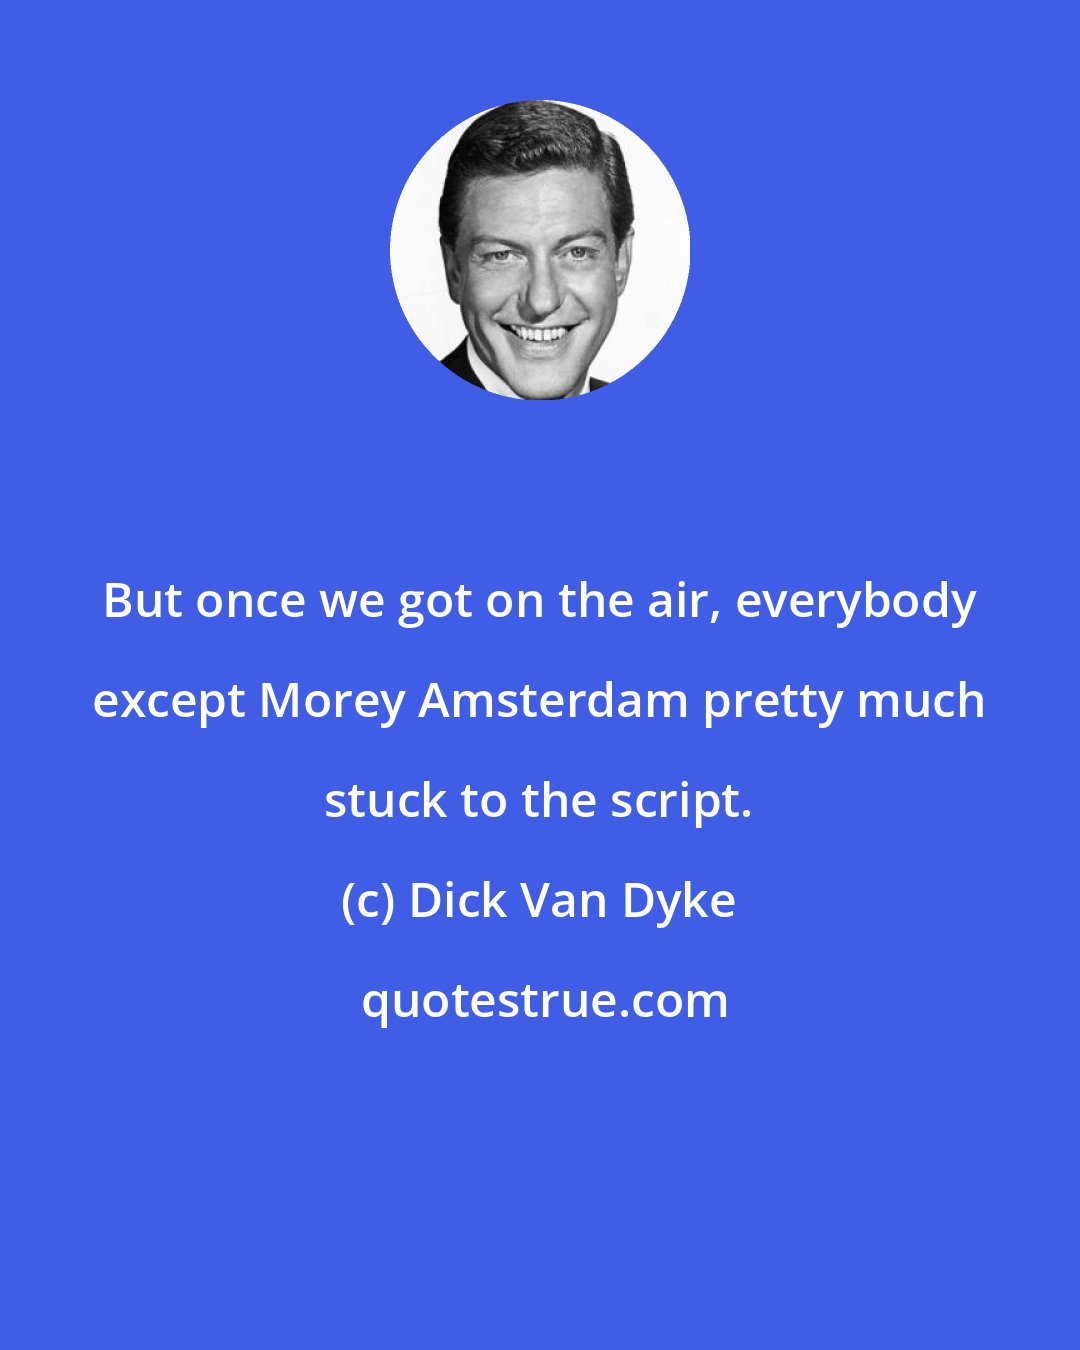 Dick Van Dyke: But once we got on the air, everybody except Morey Amsterdam pretty much stuck to the script.